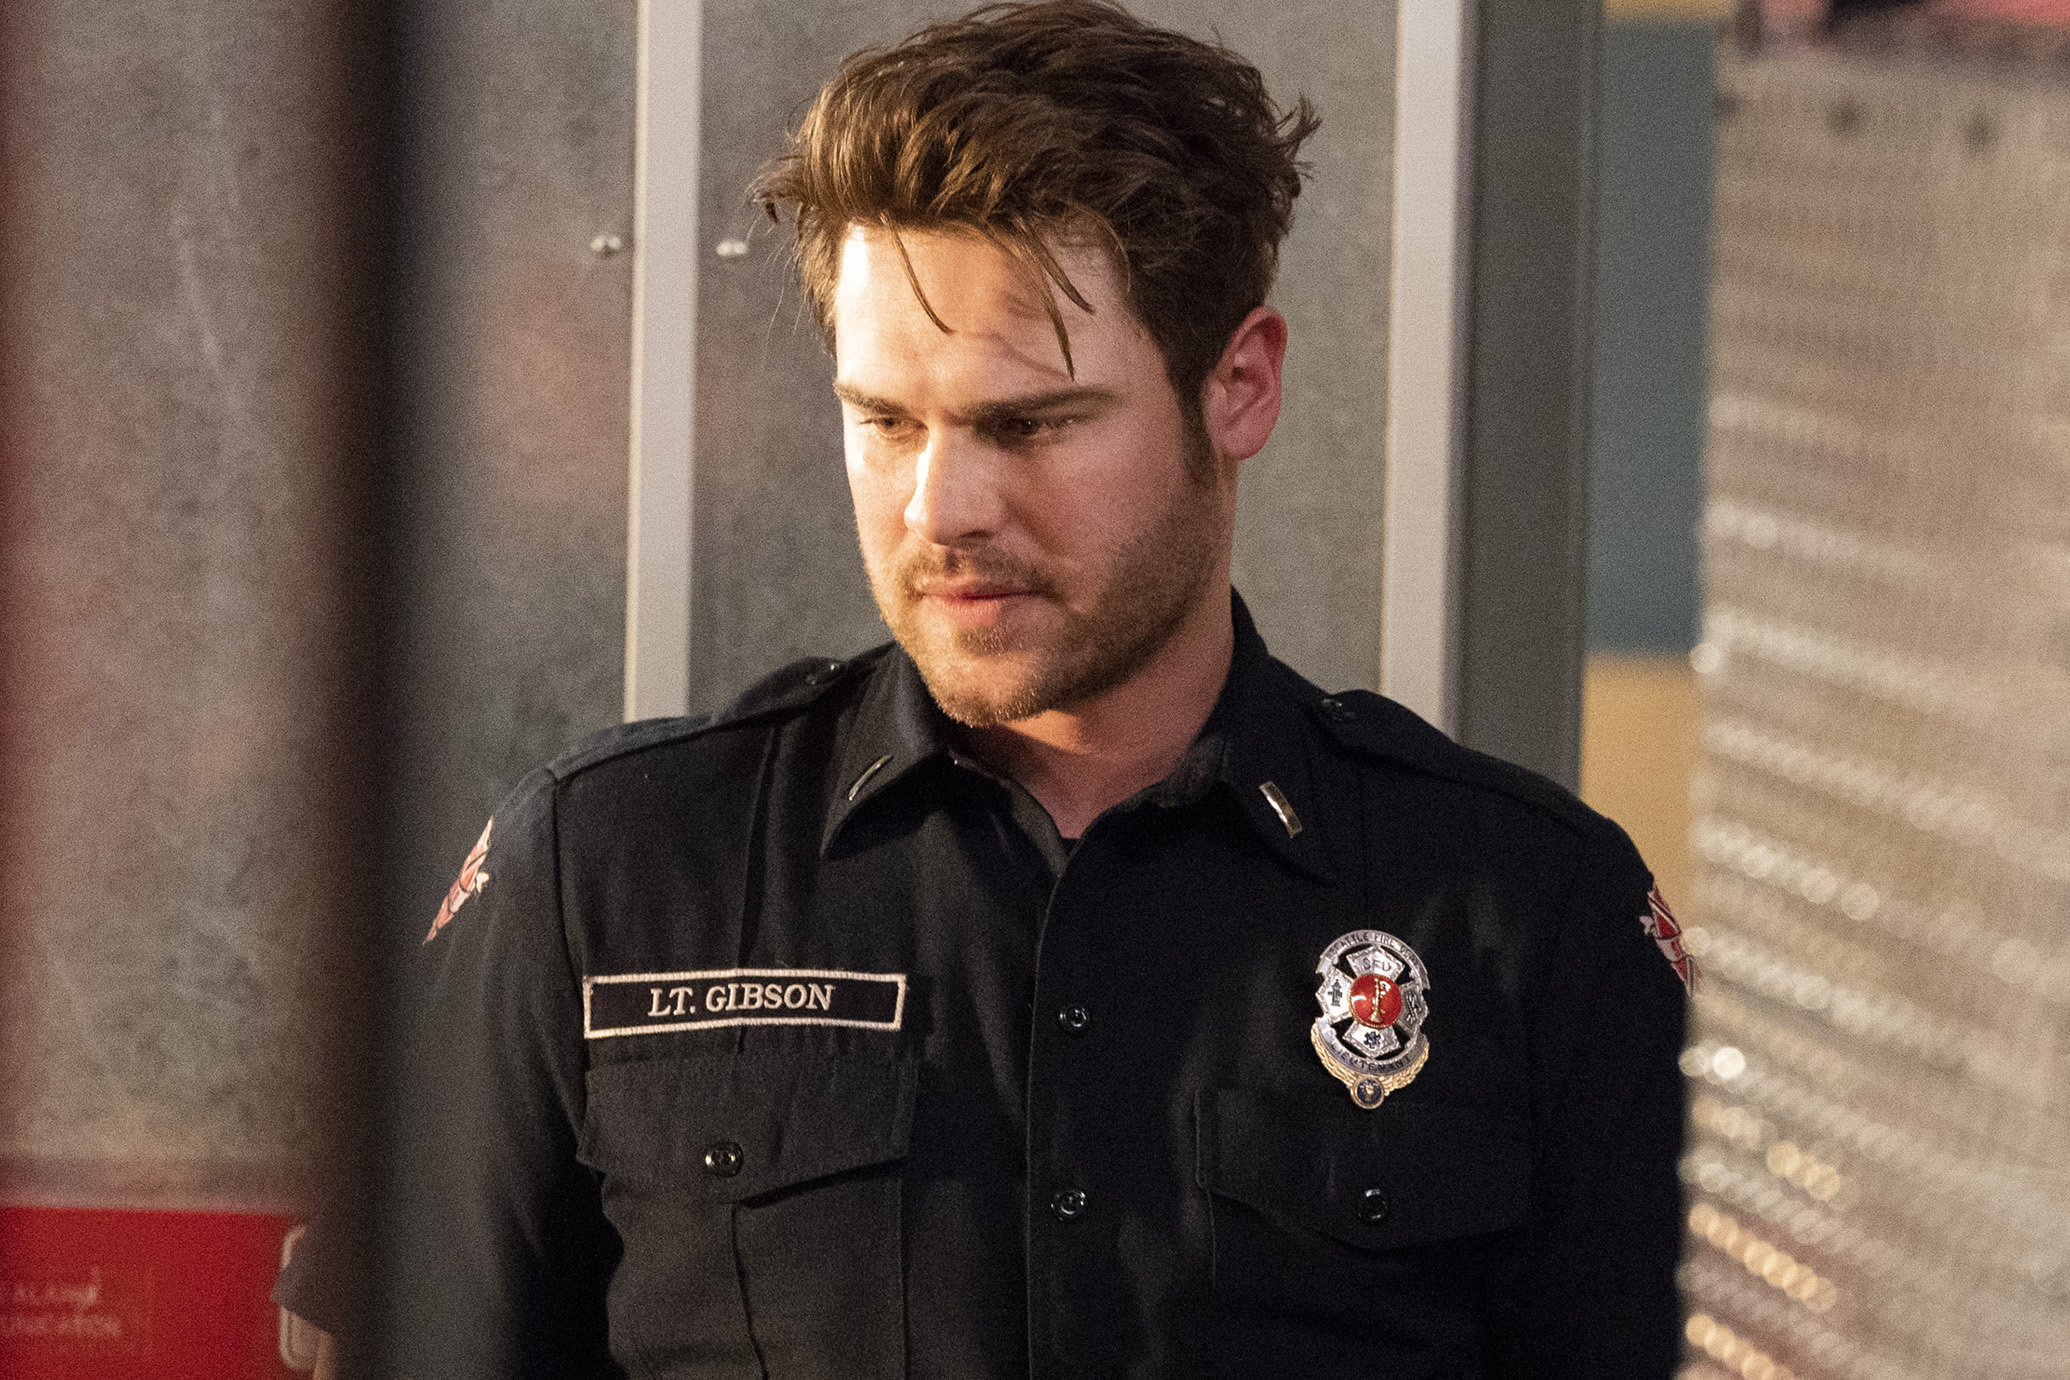 Station 19 Where We Left Off and What to Expect in the Season 2